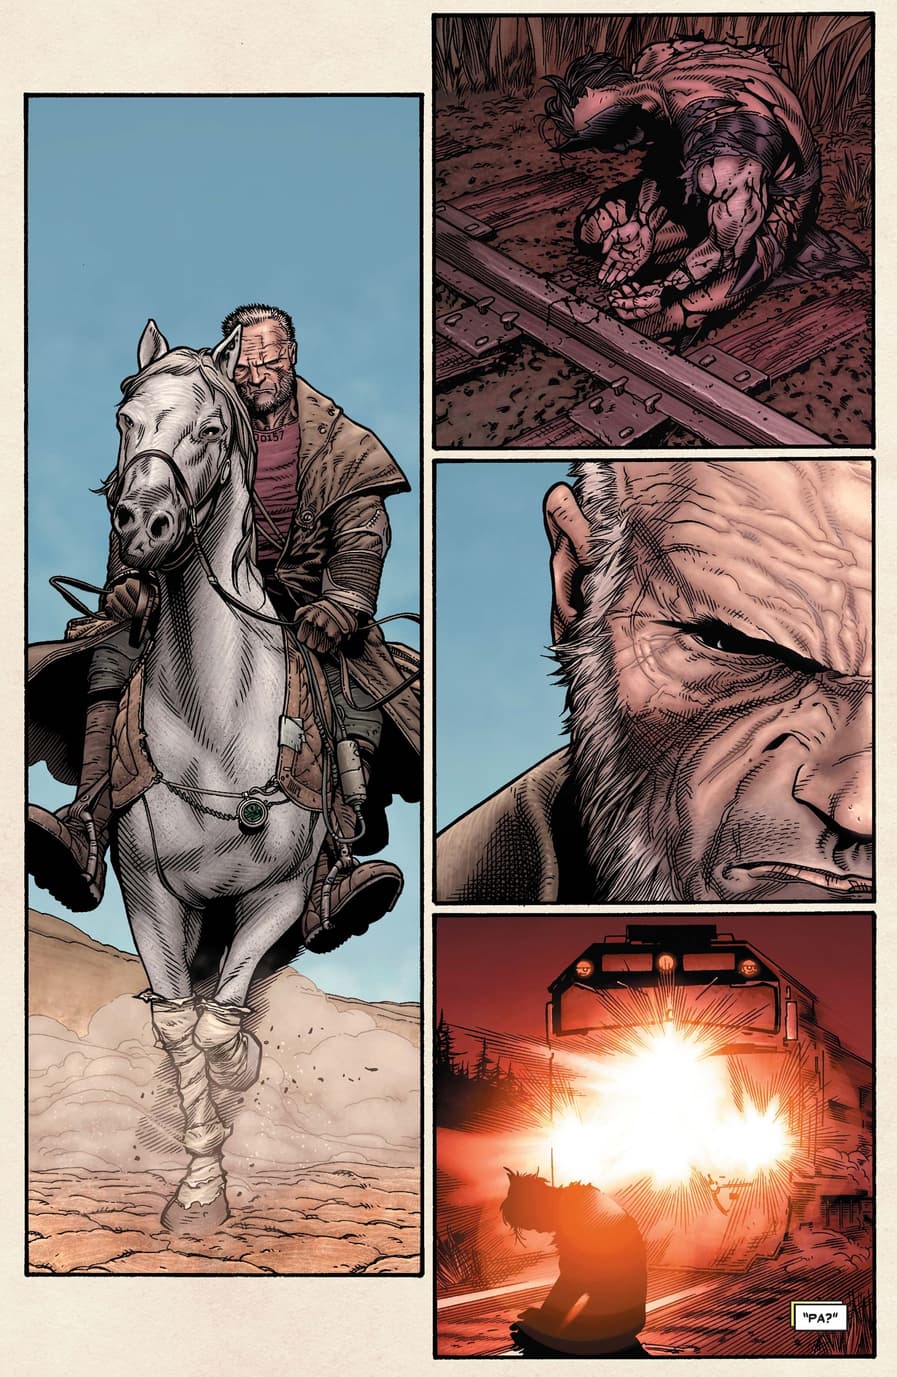 Old Man Logan in the Wasteland.